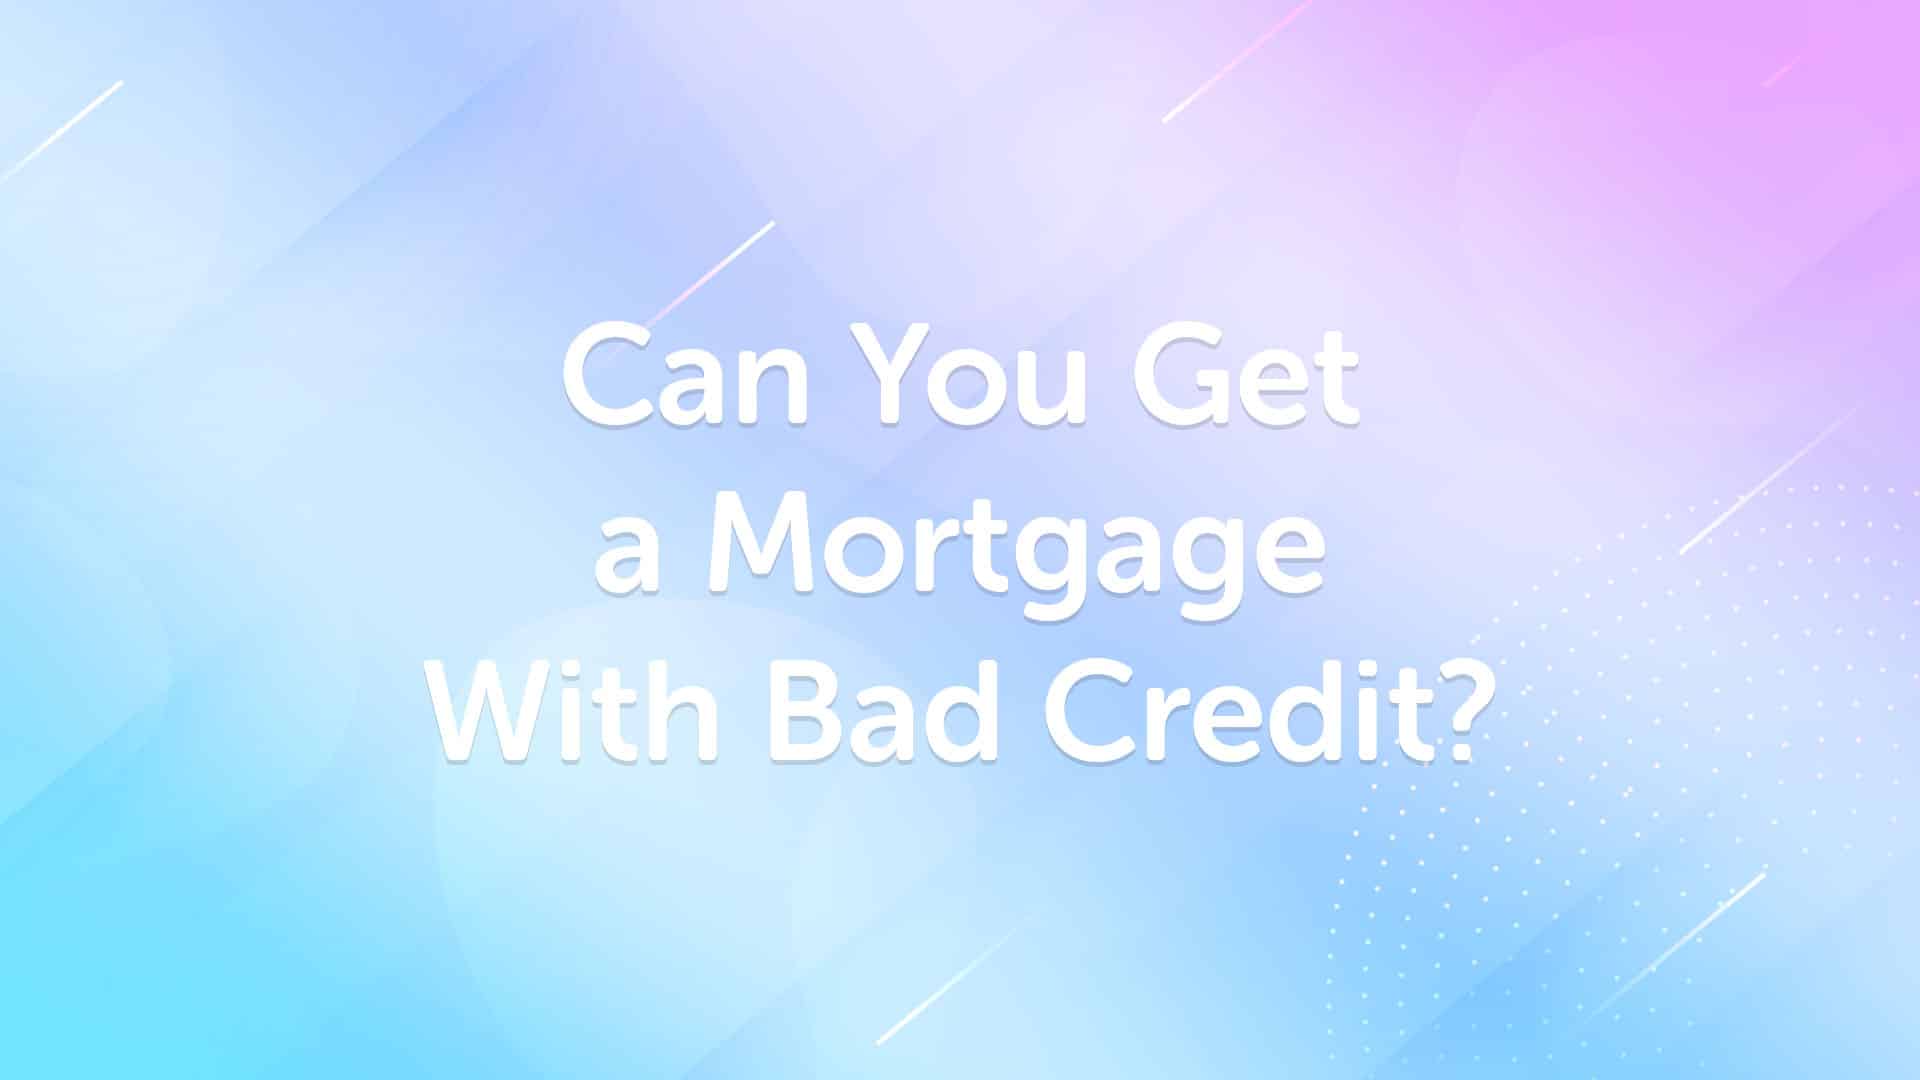 Mortgage With Bad Credit in Manchester